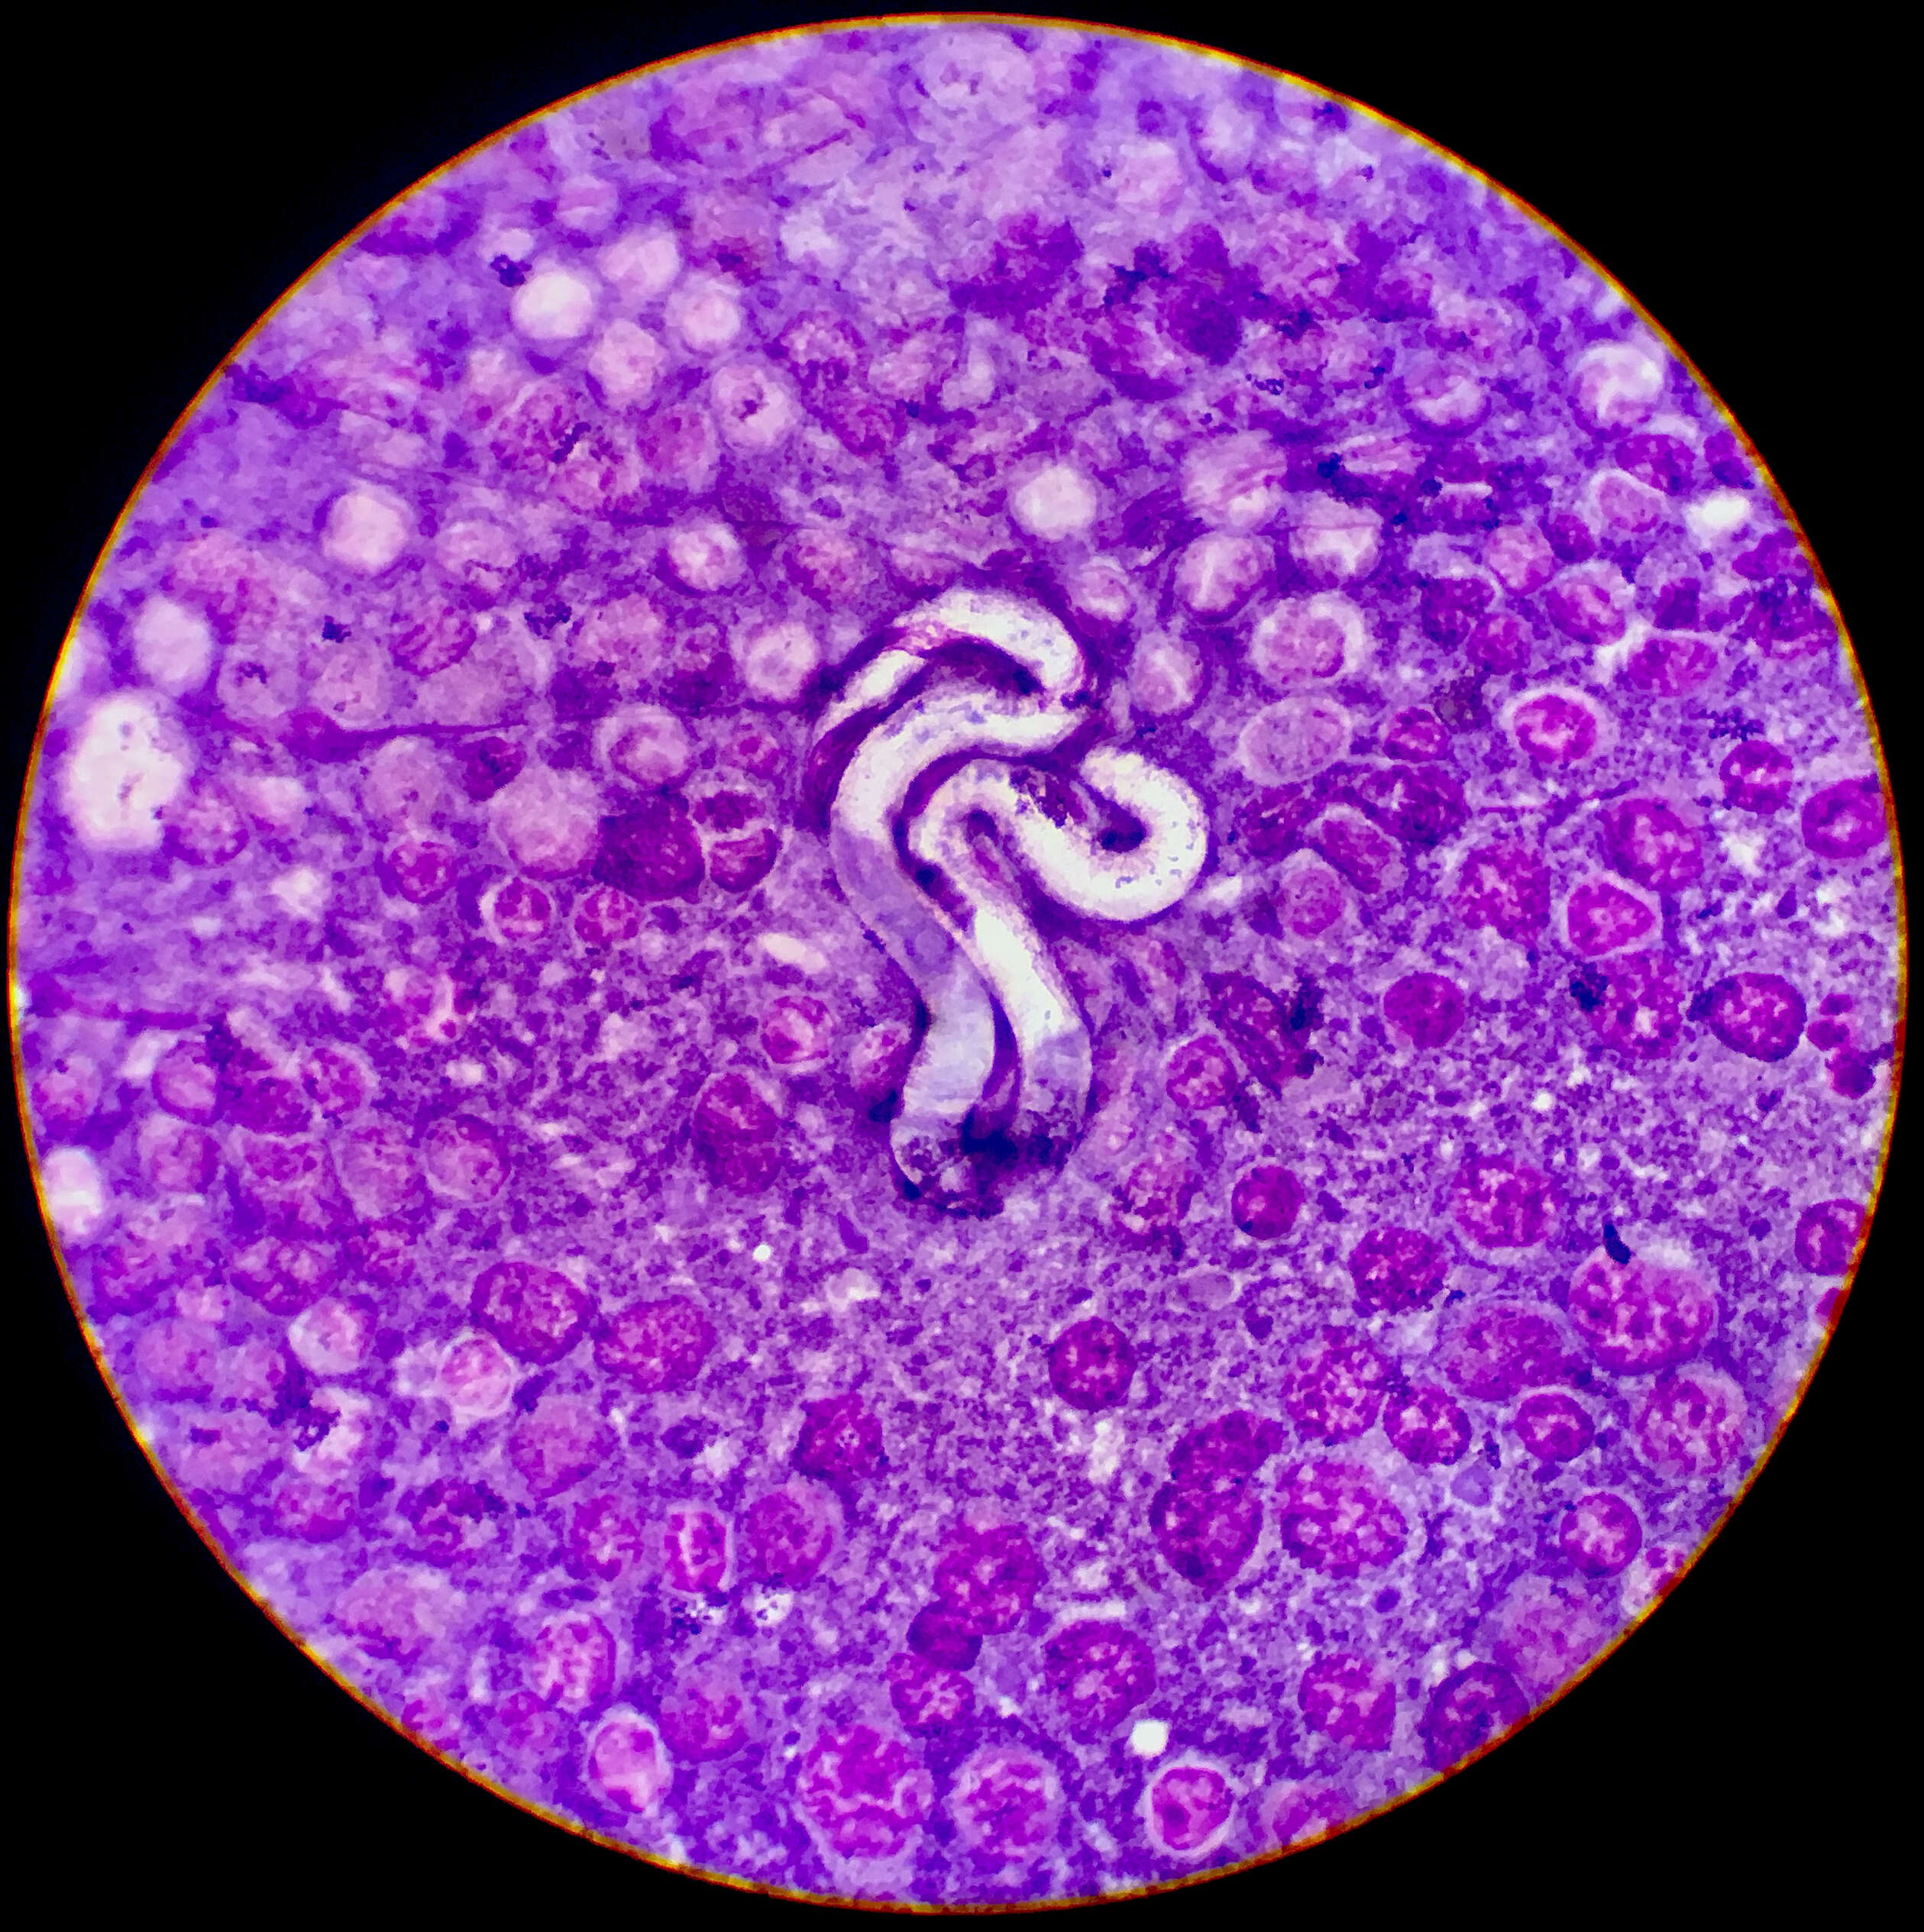 Image of Heartworm